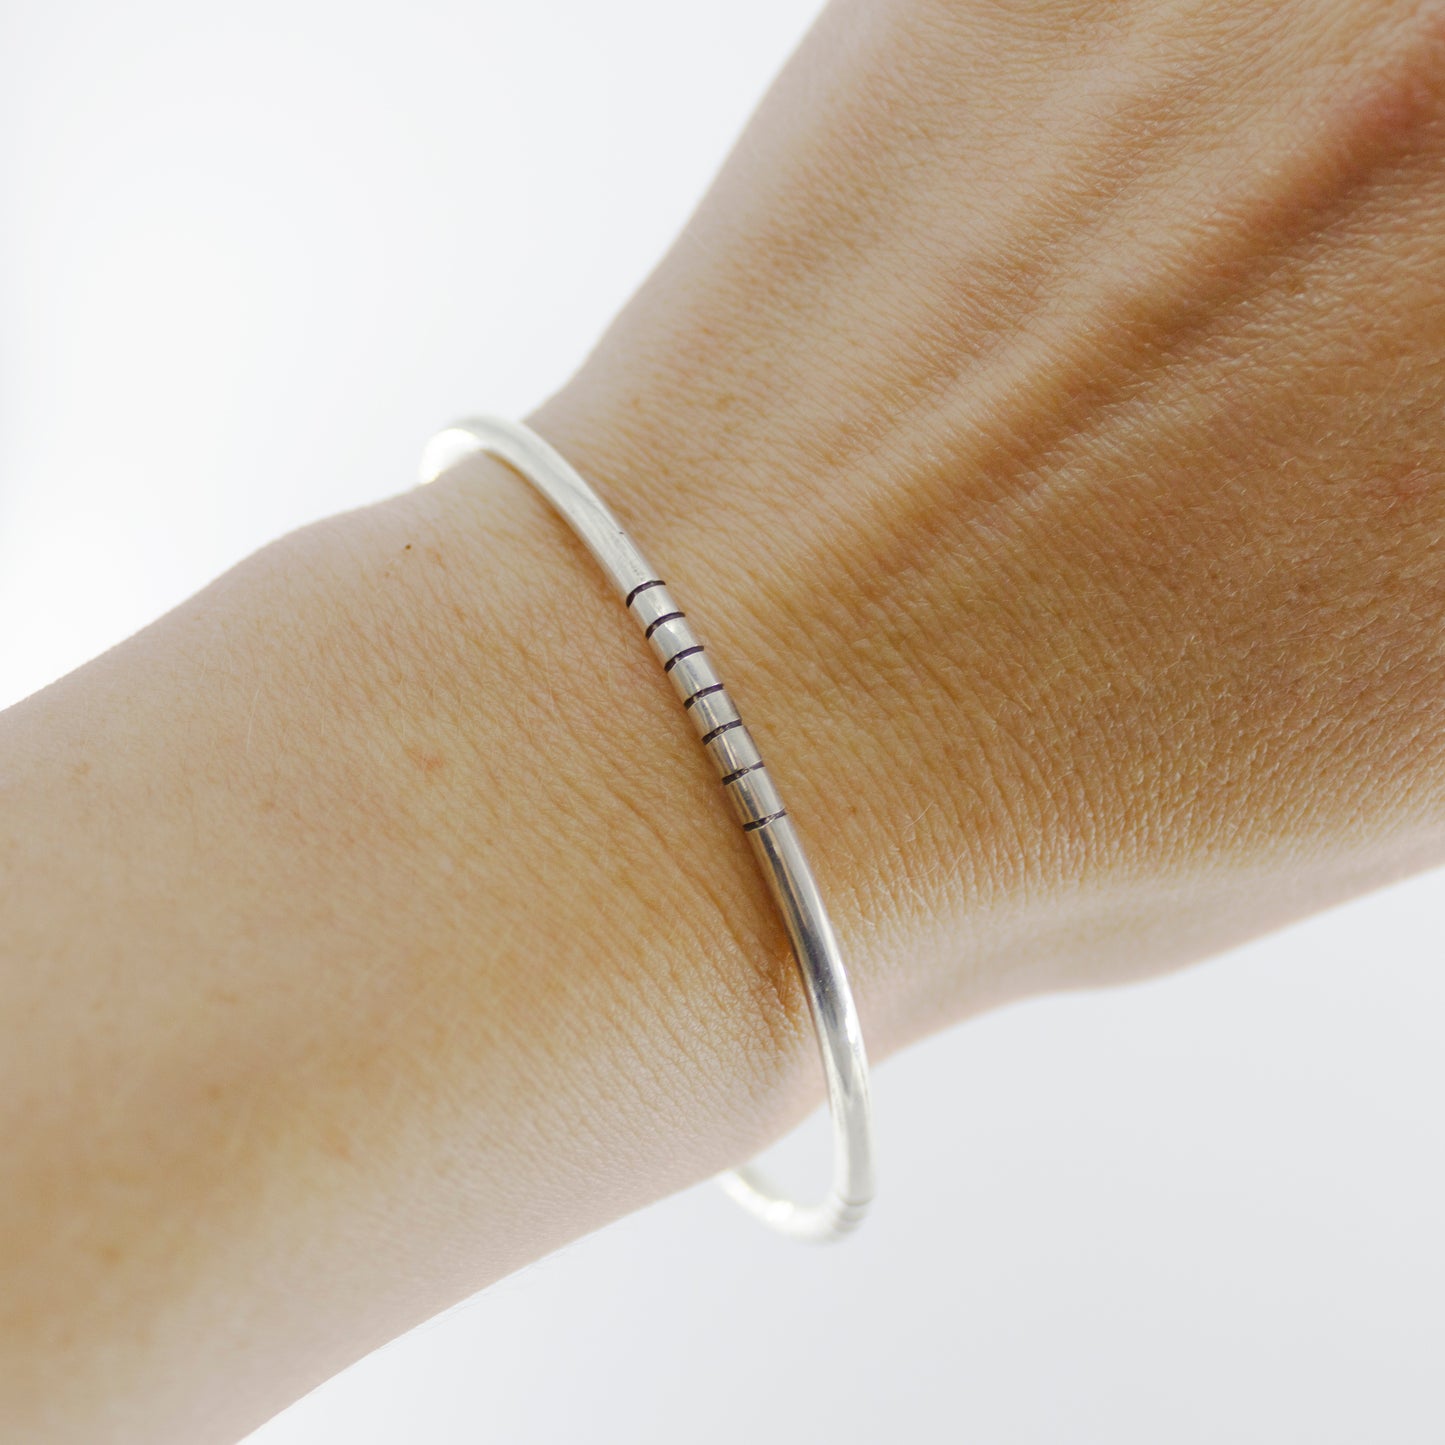 Andrea Mueller, Round Bangle with Linear Details